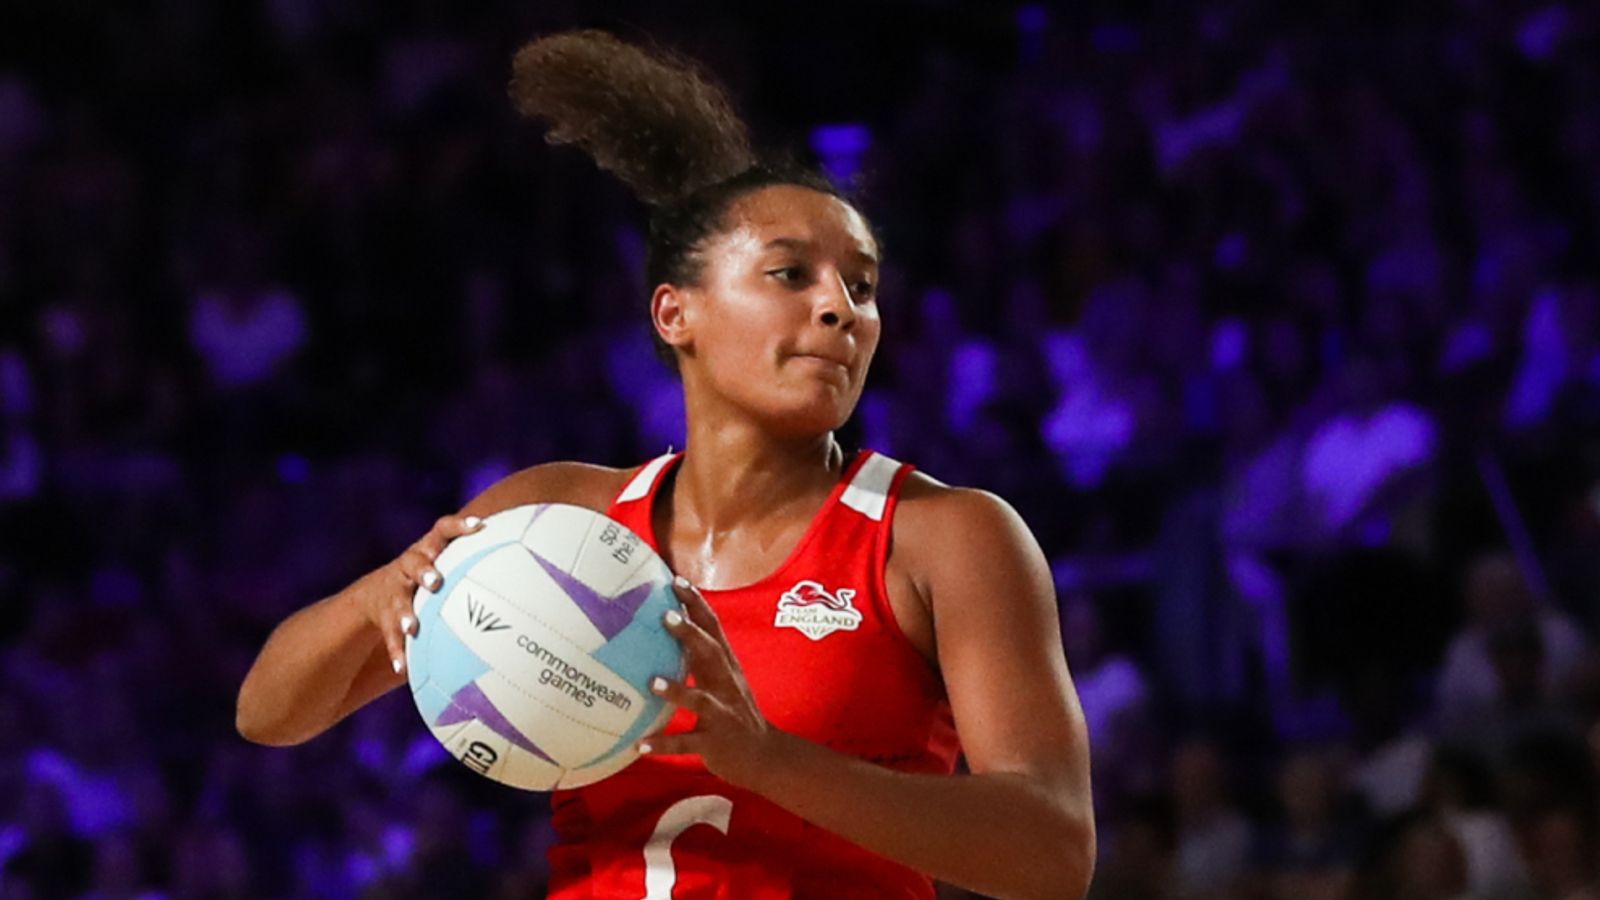 England’s Vitality Roses invited to compete at Netball World Cup but drop ranking place